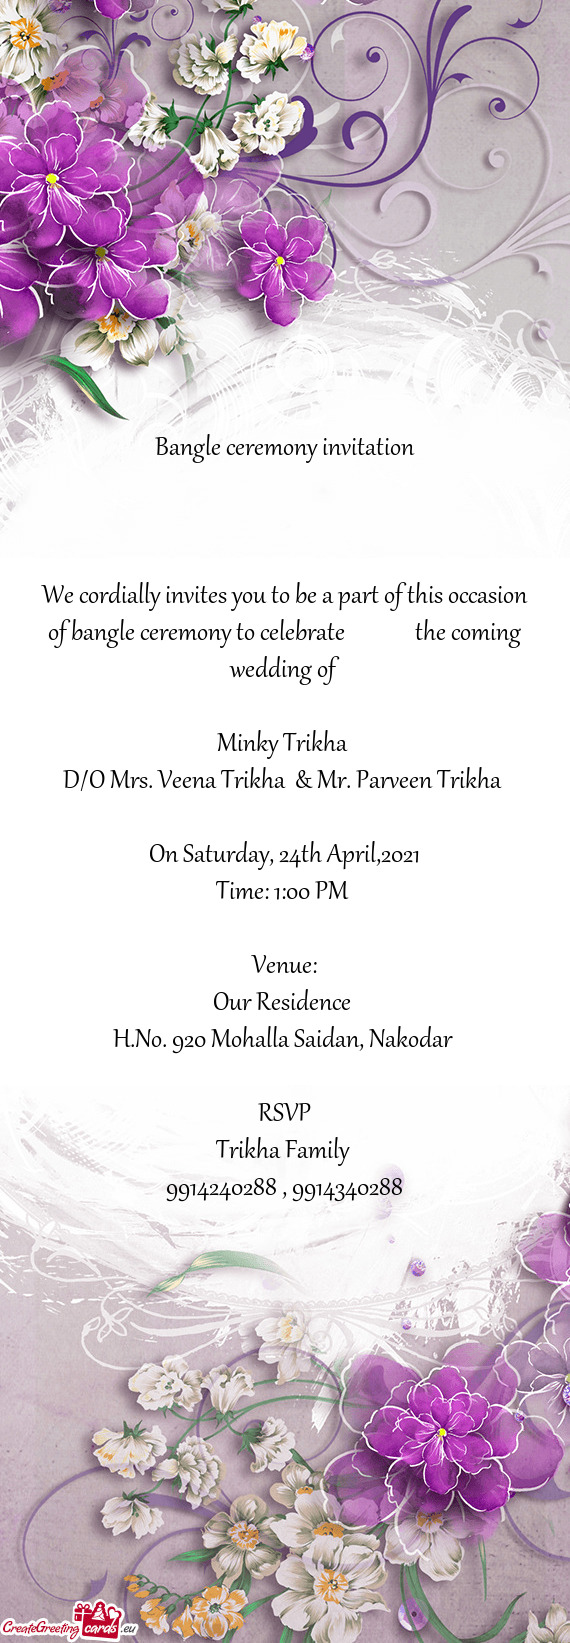 We cordially invites you to be a part of this occasion of bangle ceremony to celebrate